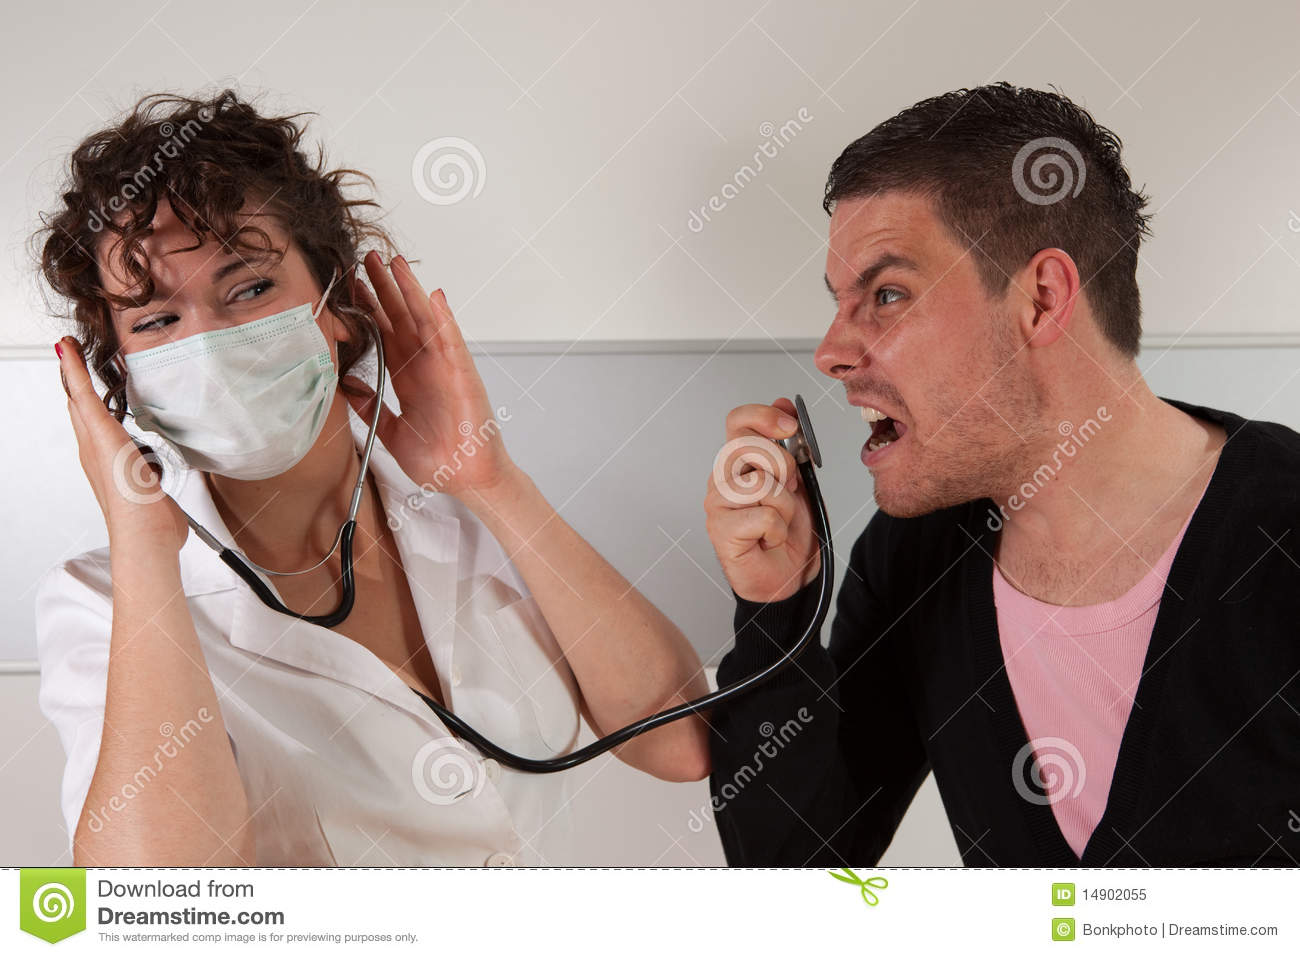 Angry Patient Royalty Free Stock Photo   Image  14902055